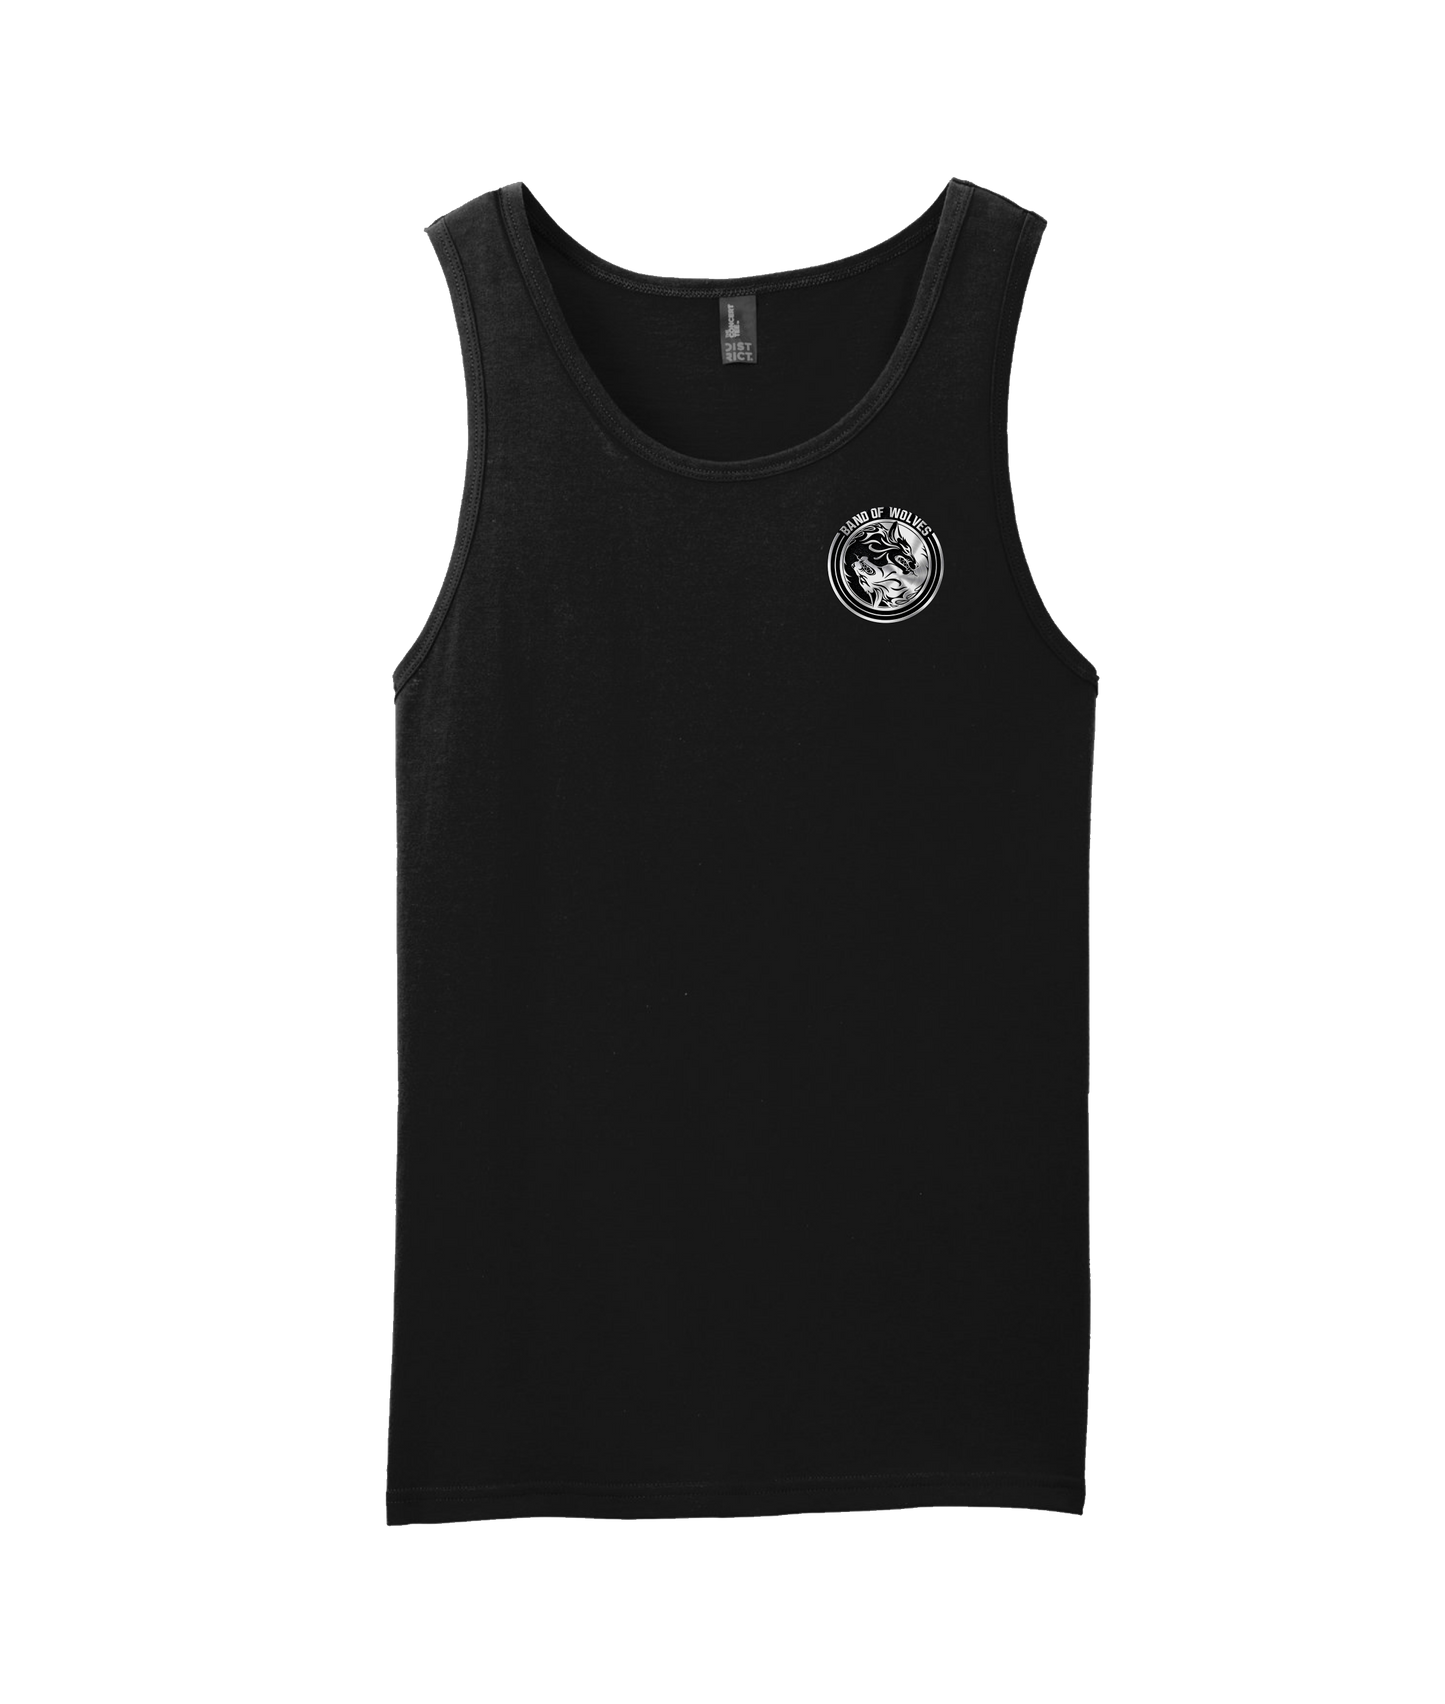 Band of Wolves - The Wolf - Black Tank Top